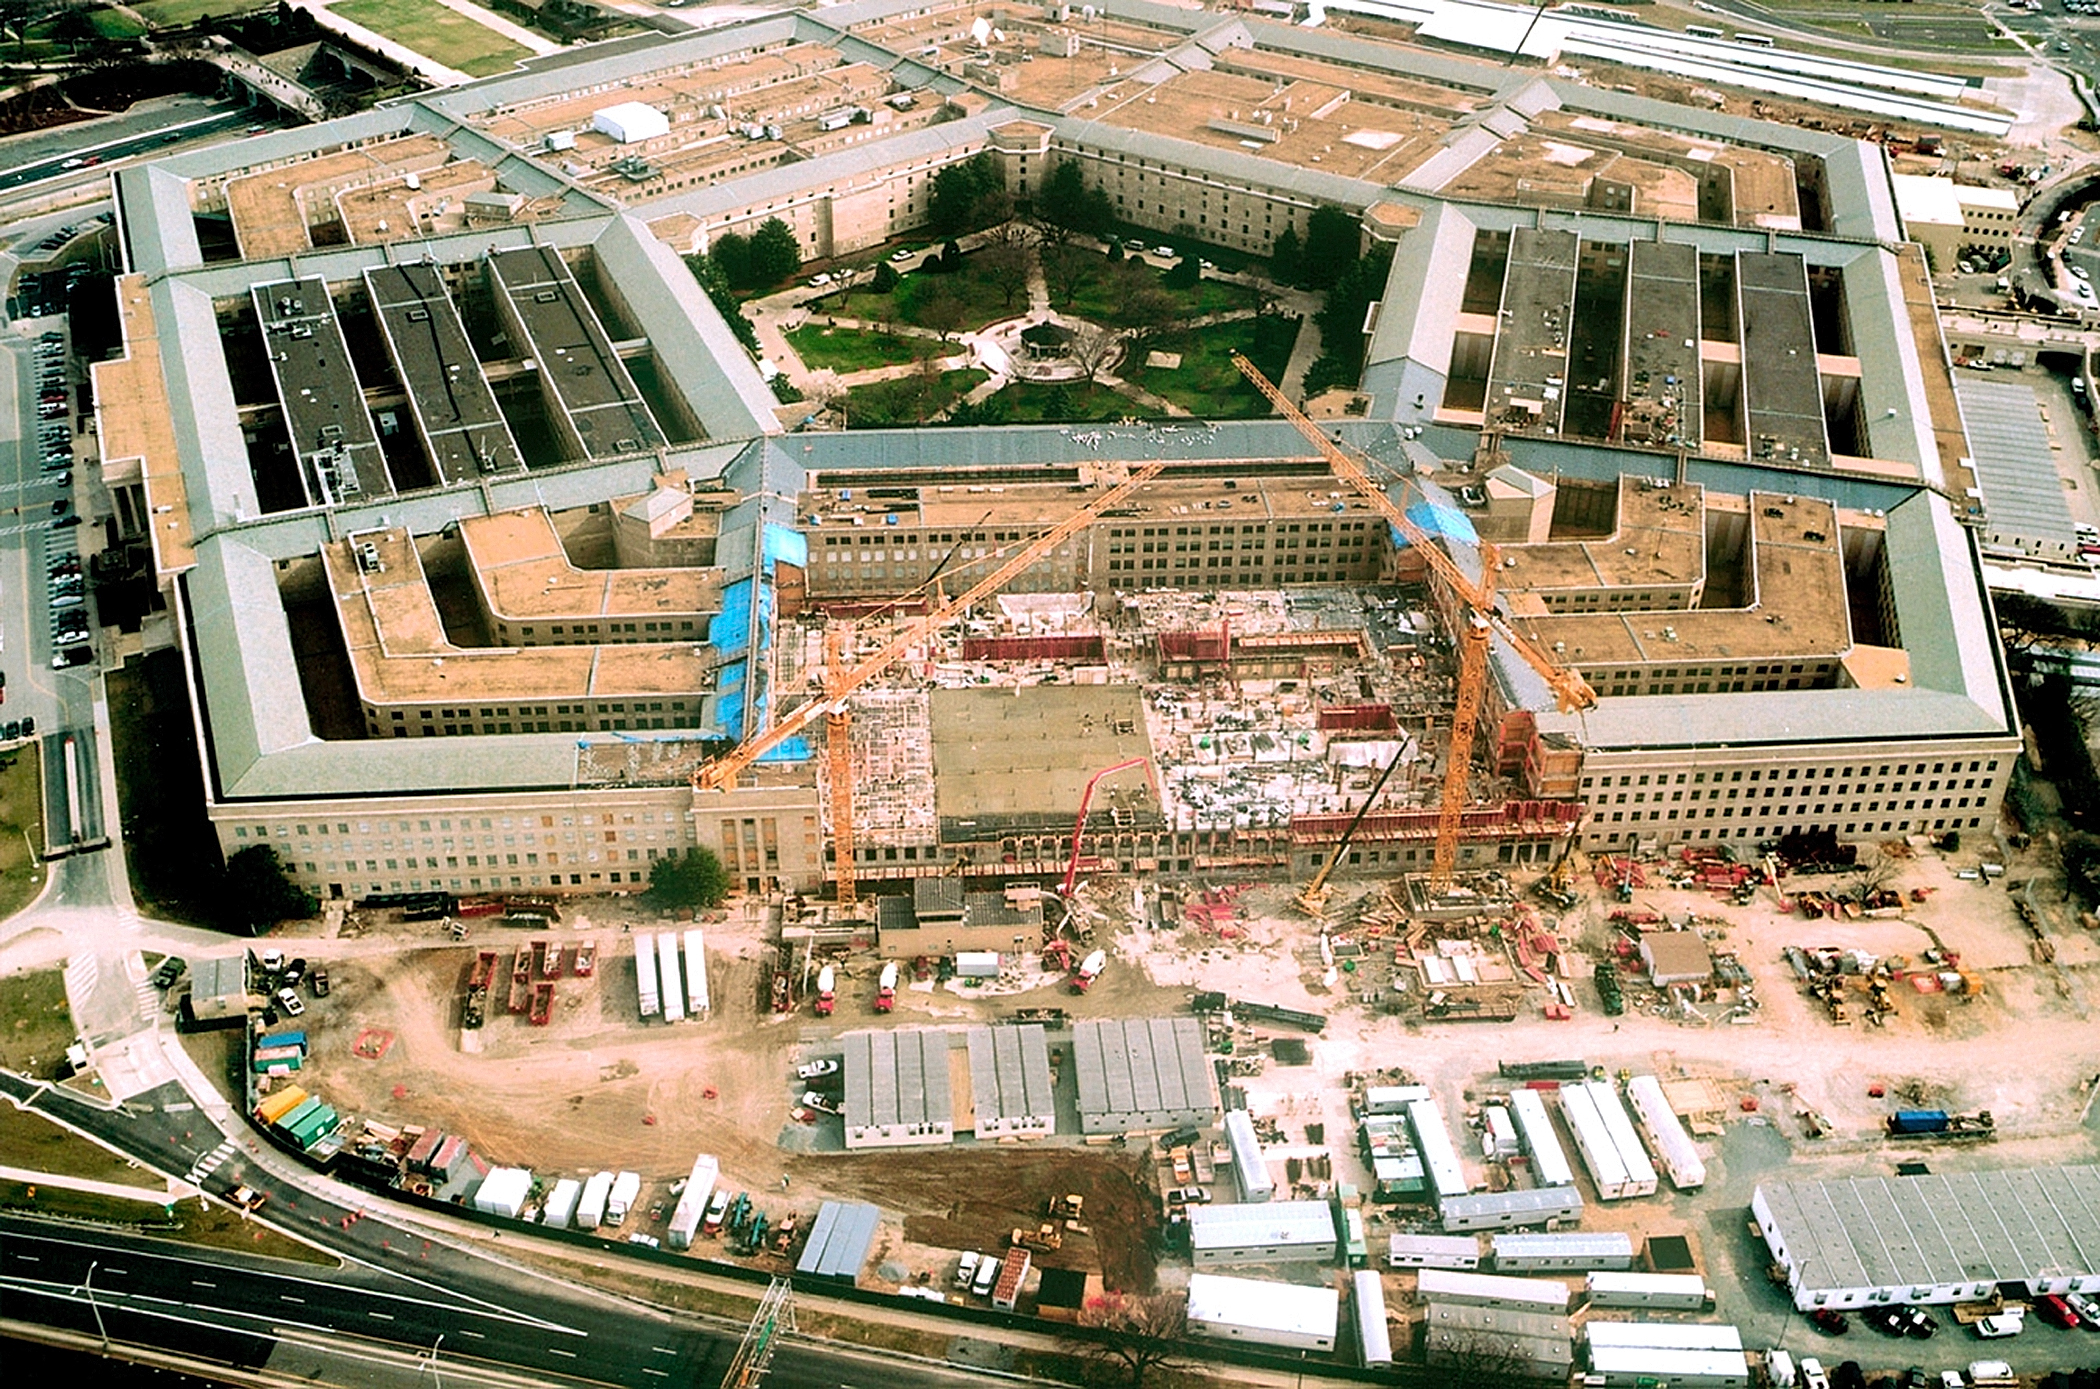 911 clipart attack. Repairs to pentagon after